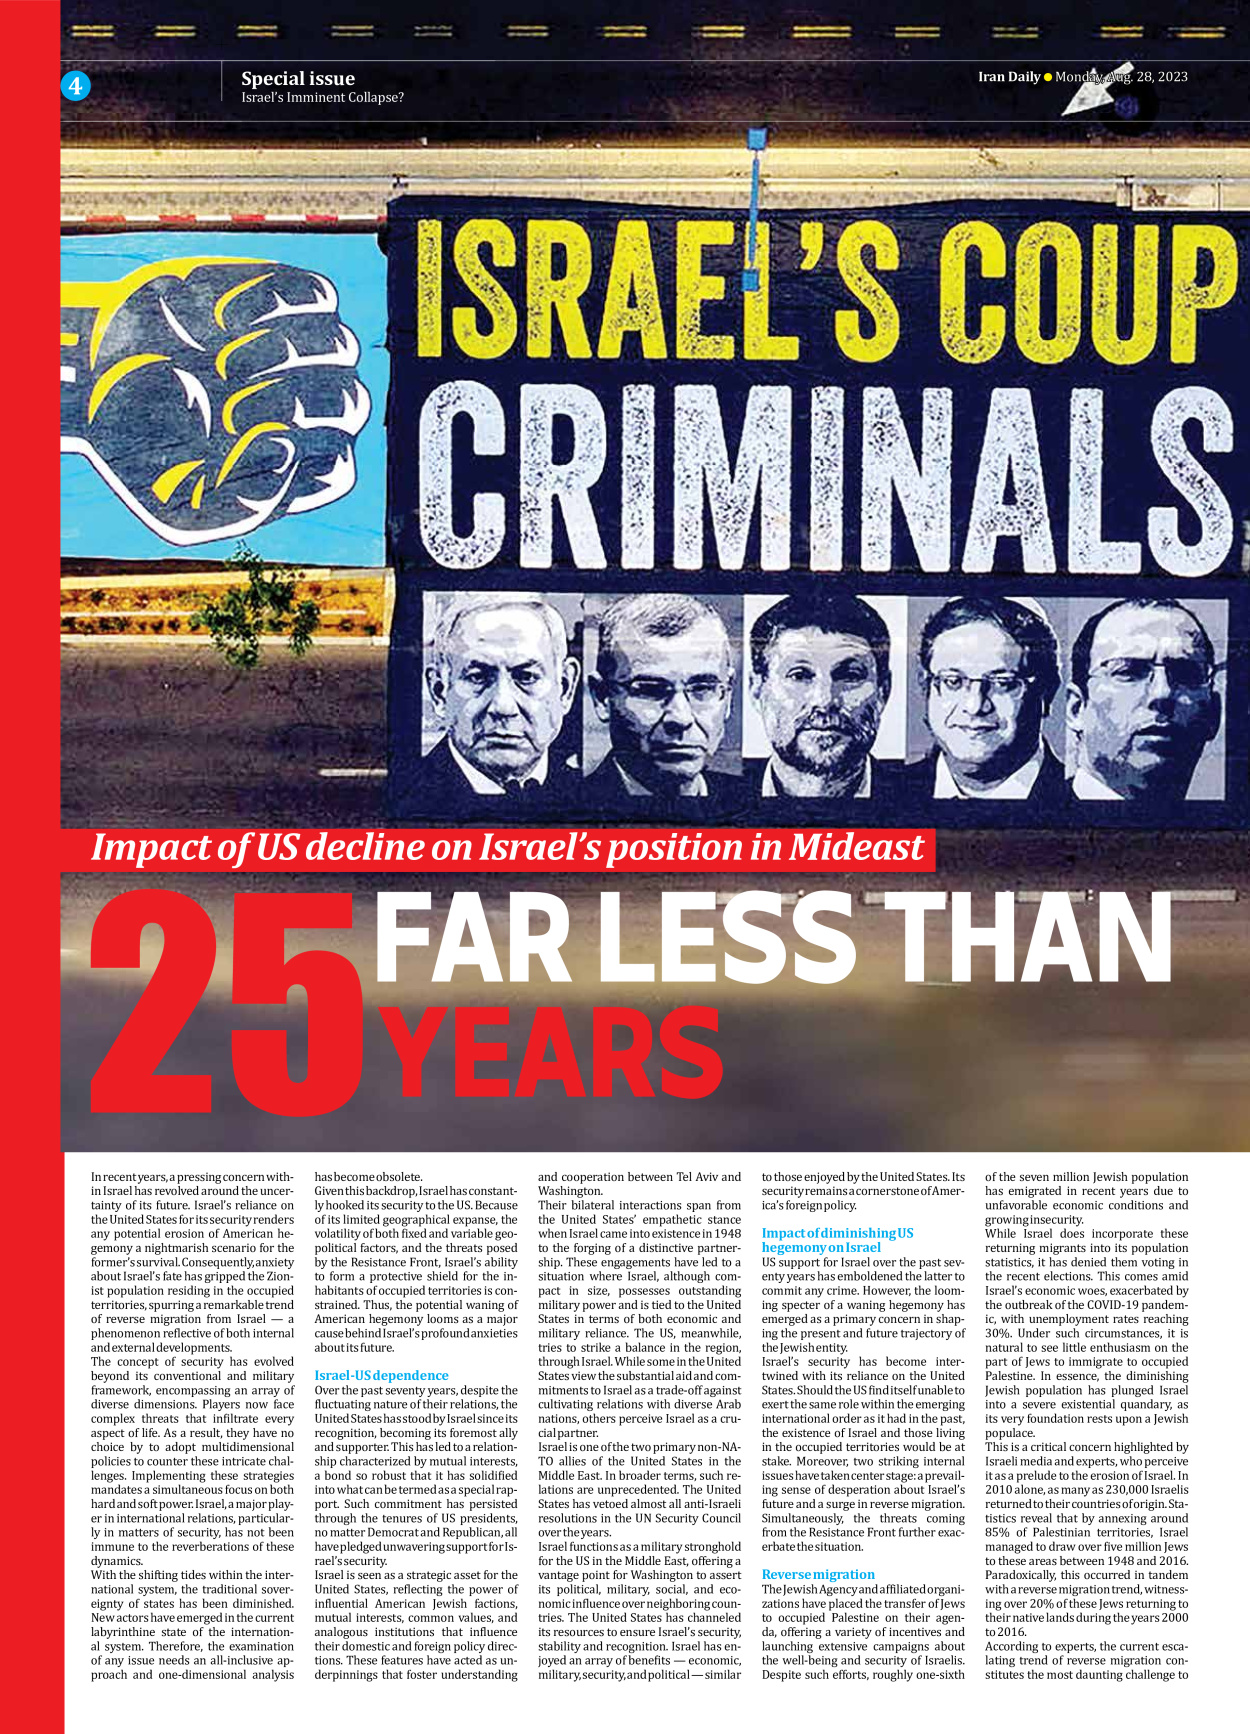 Iran Daily - Number Seven Thousand Three Hundred and Seventy Four - 28 August 2023 - Page 4